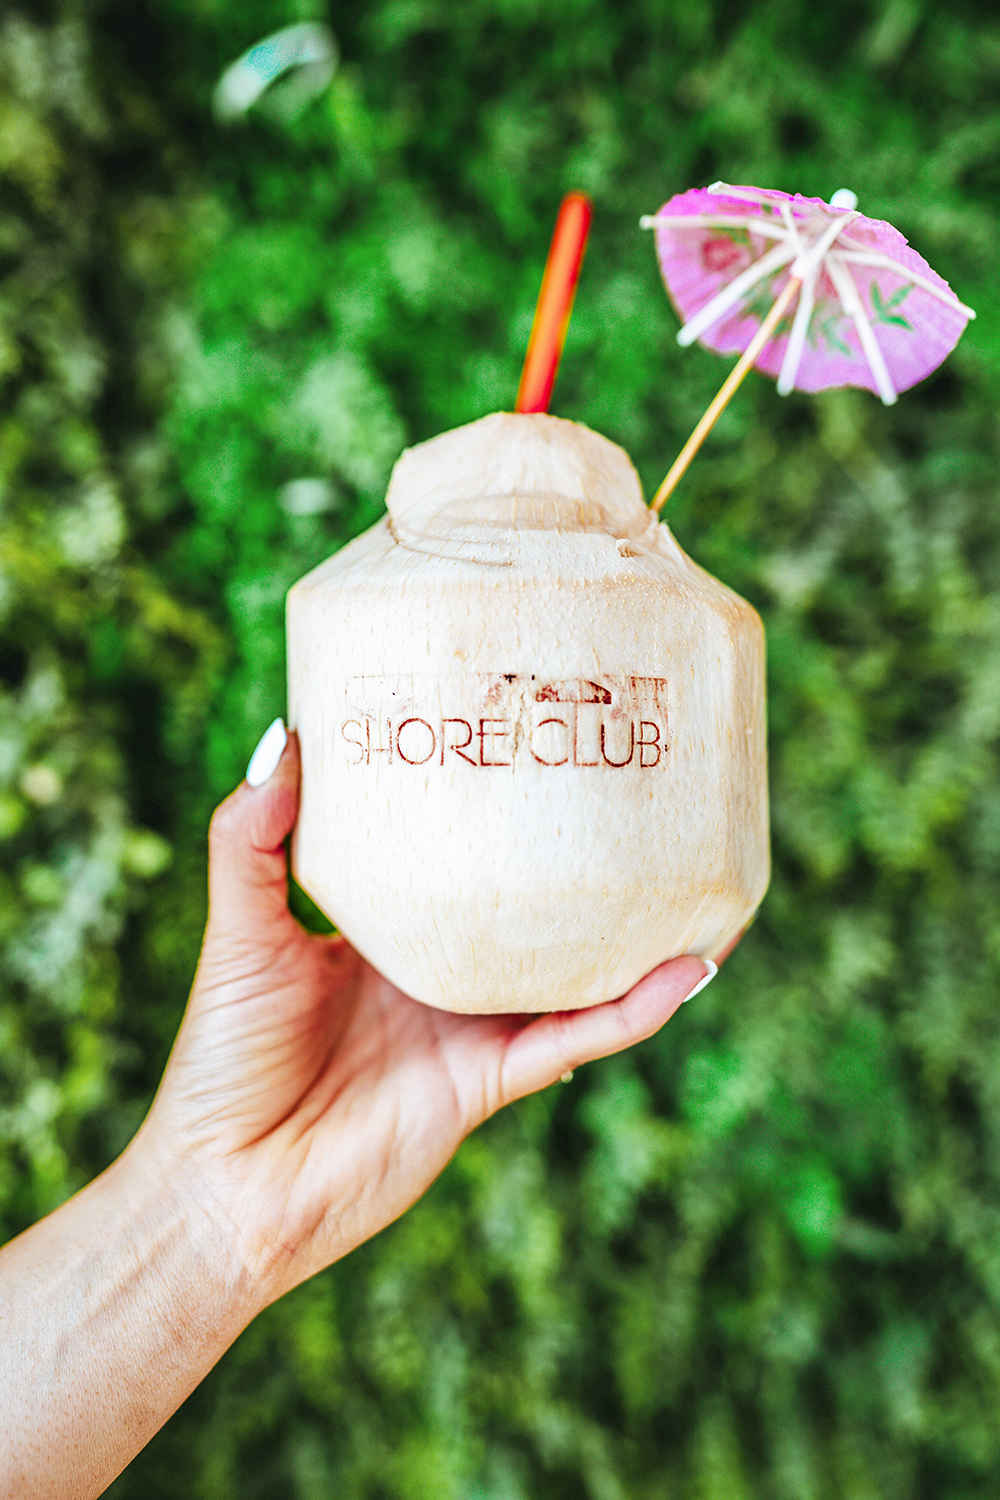 coconut cocktail drink with an umbrella from a beach club and bar in Chicago near the lakeside shoreline